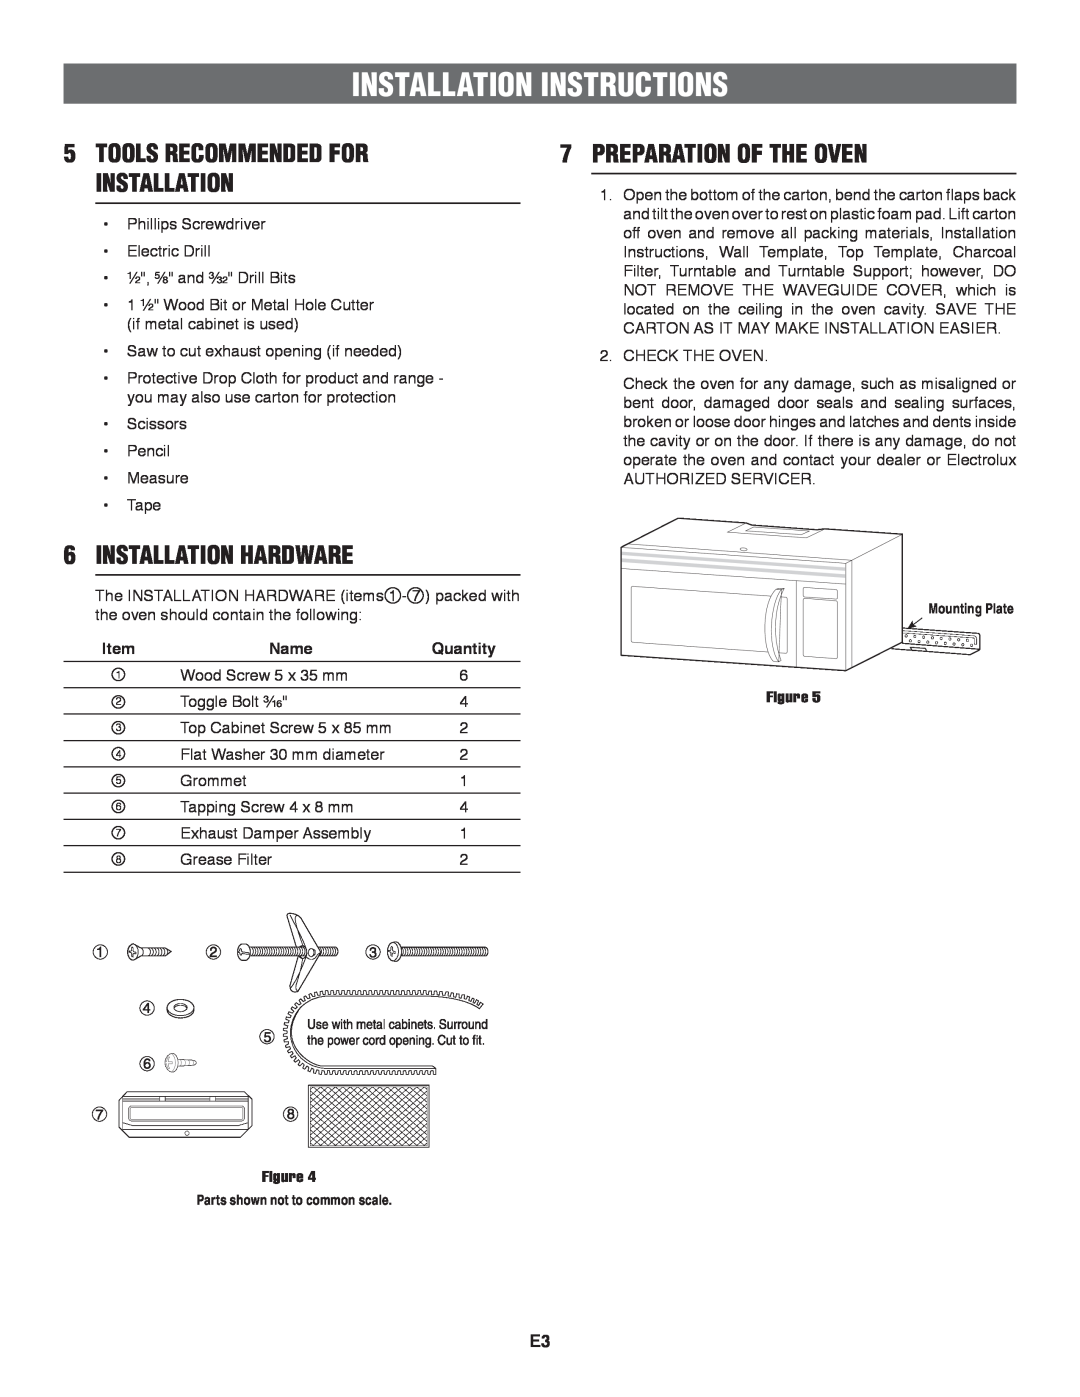 Frigidaire 316137234, TINSEB151WRRZ Preparation Of The Oven, Installation Hardware, Tools Recommended For Installation 